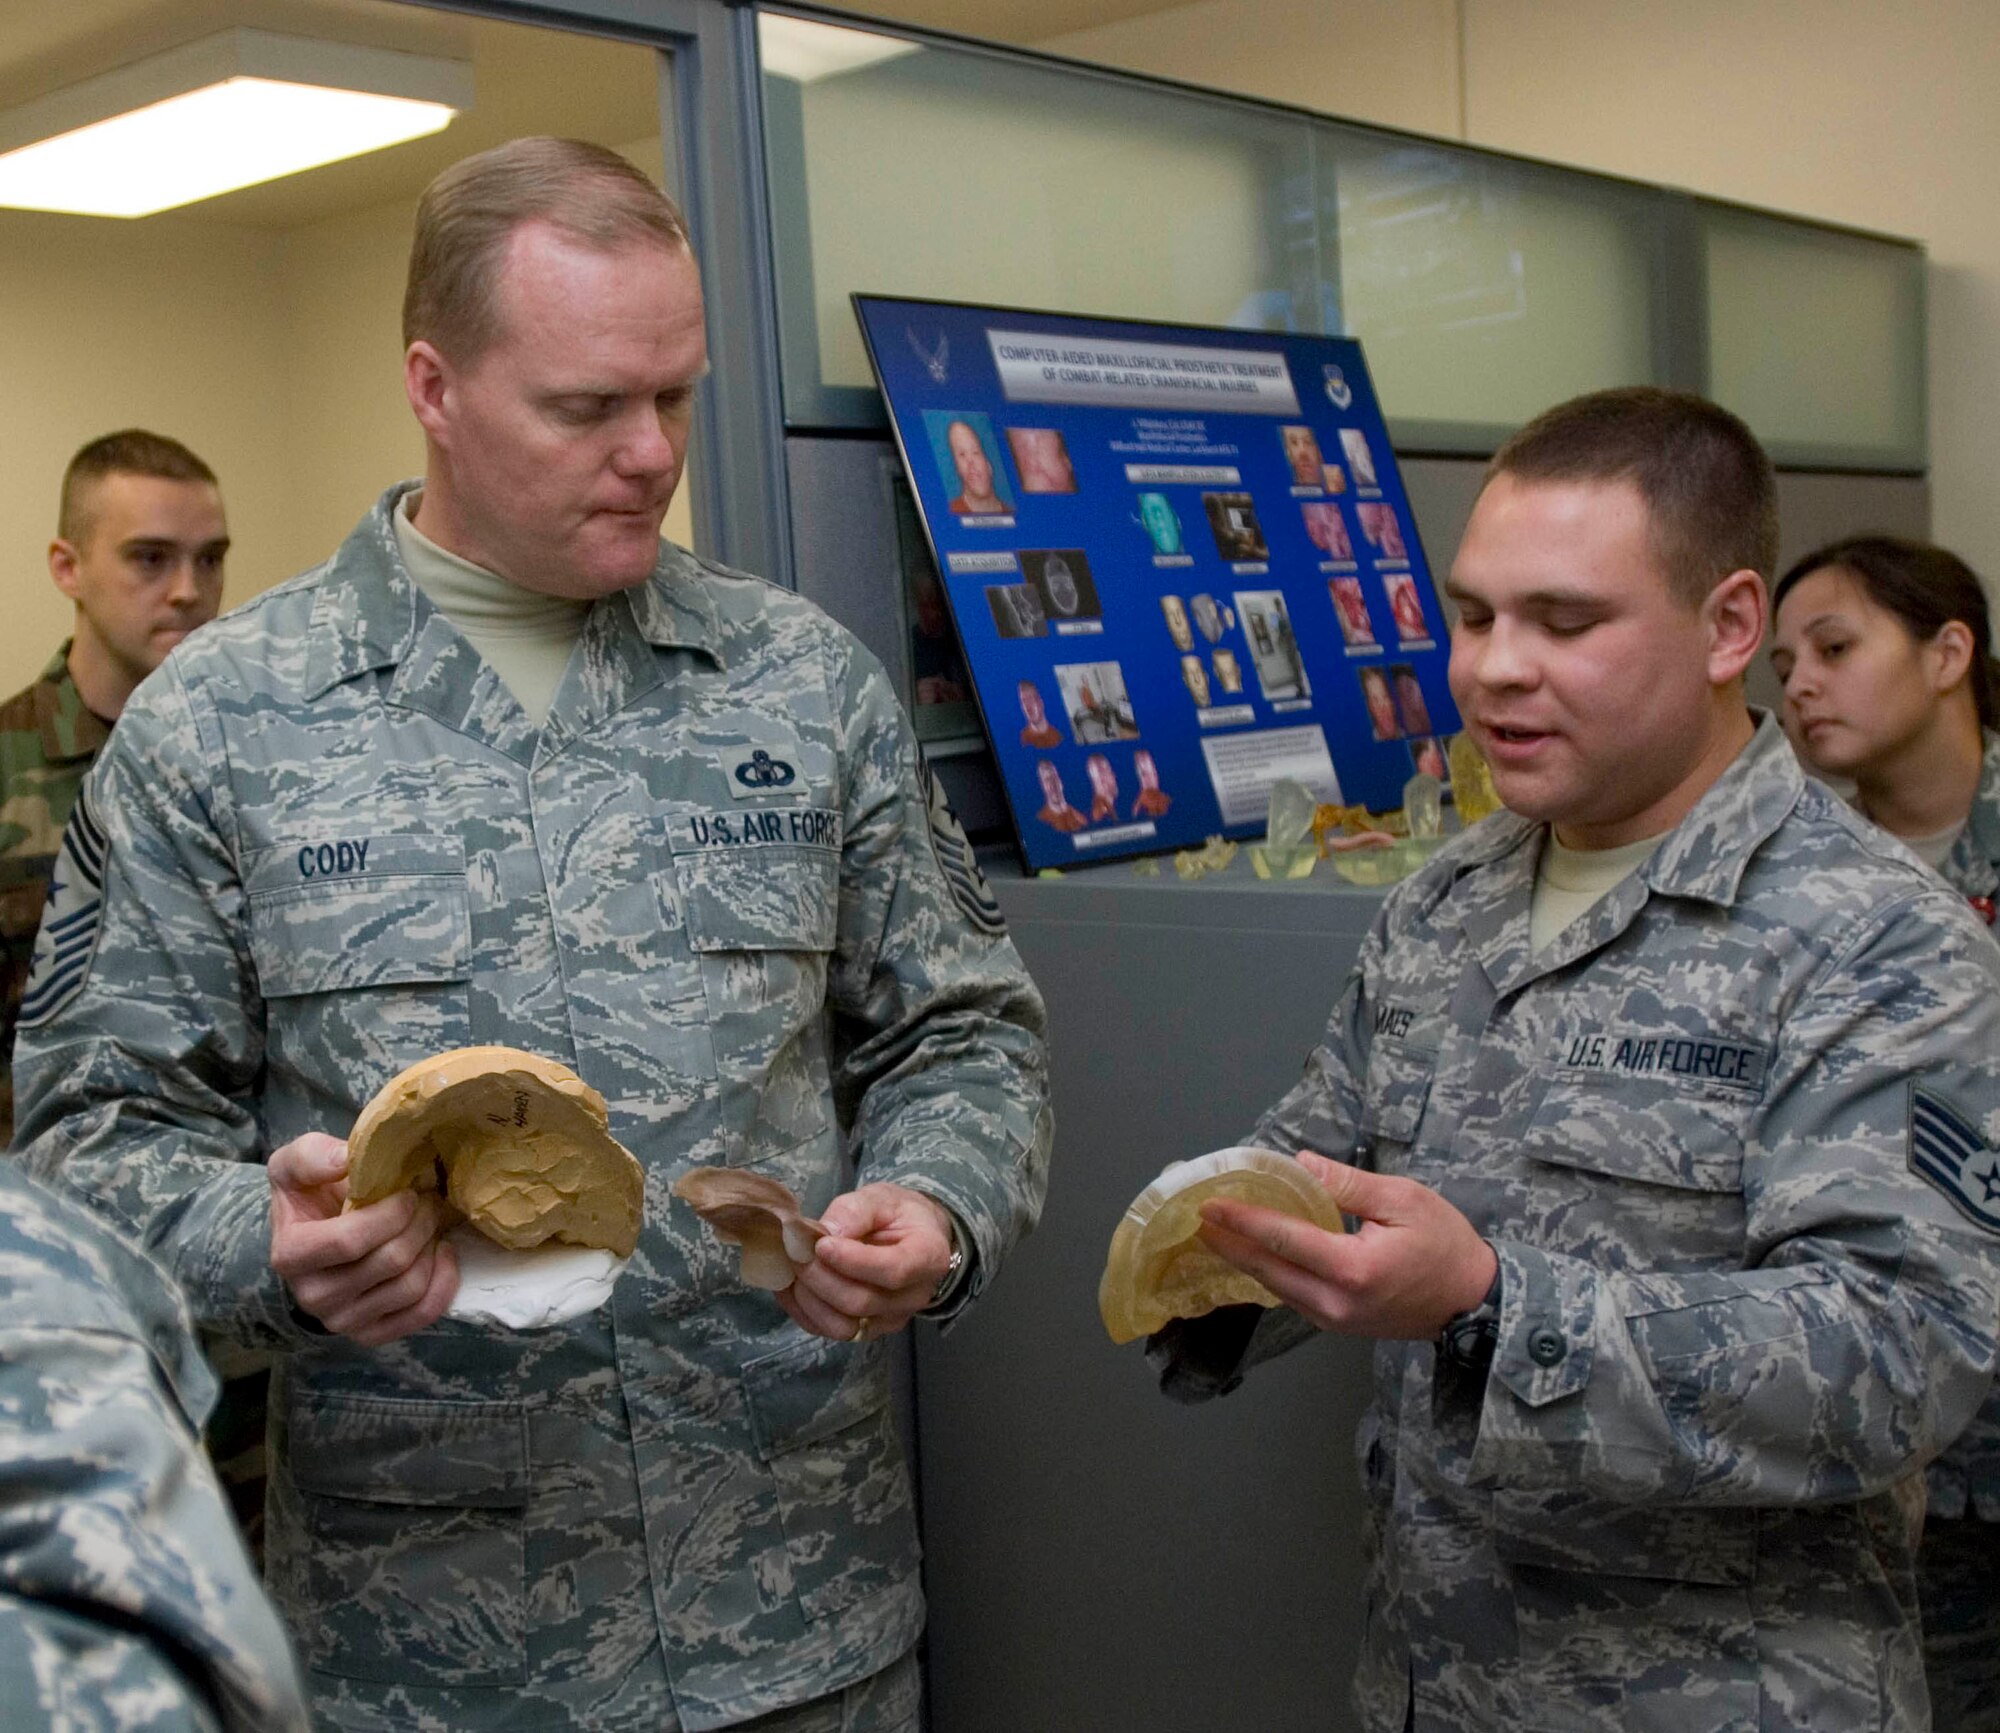 Staff Sgt. Christian Maes, 59th Dental Squadron dental laboratory journeyman (right), shows Chief Master Sgt. James Cody, Air Education and Training Command Chief (center), models he helped create using sterolithography at the MacKown Dental Clinic, Lackland Air Force Base, Texas, Jan. 12. The stereolithography lab on Lackland is one of only a few in the Department of Defense that creates prosthetic body parts, such as eyes, ears, and noses for wounded warriors. (U.S. Air Force photo/Senior Airman Corey Hook)
























 